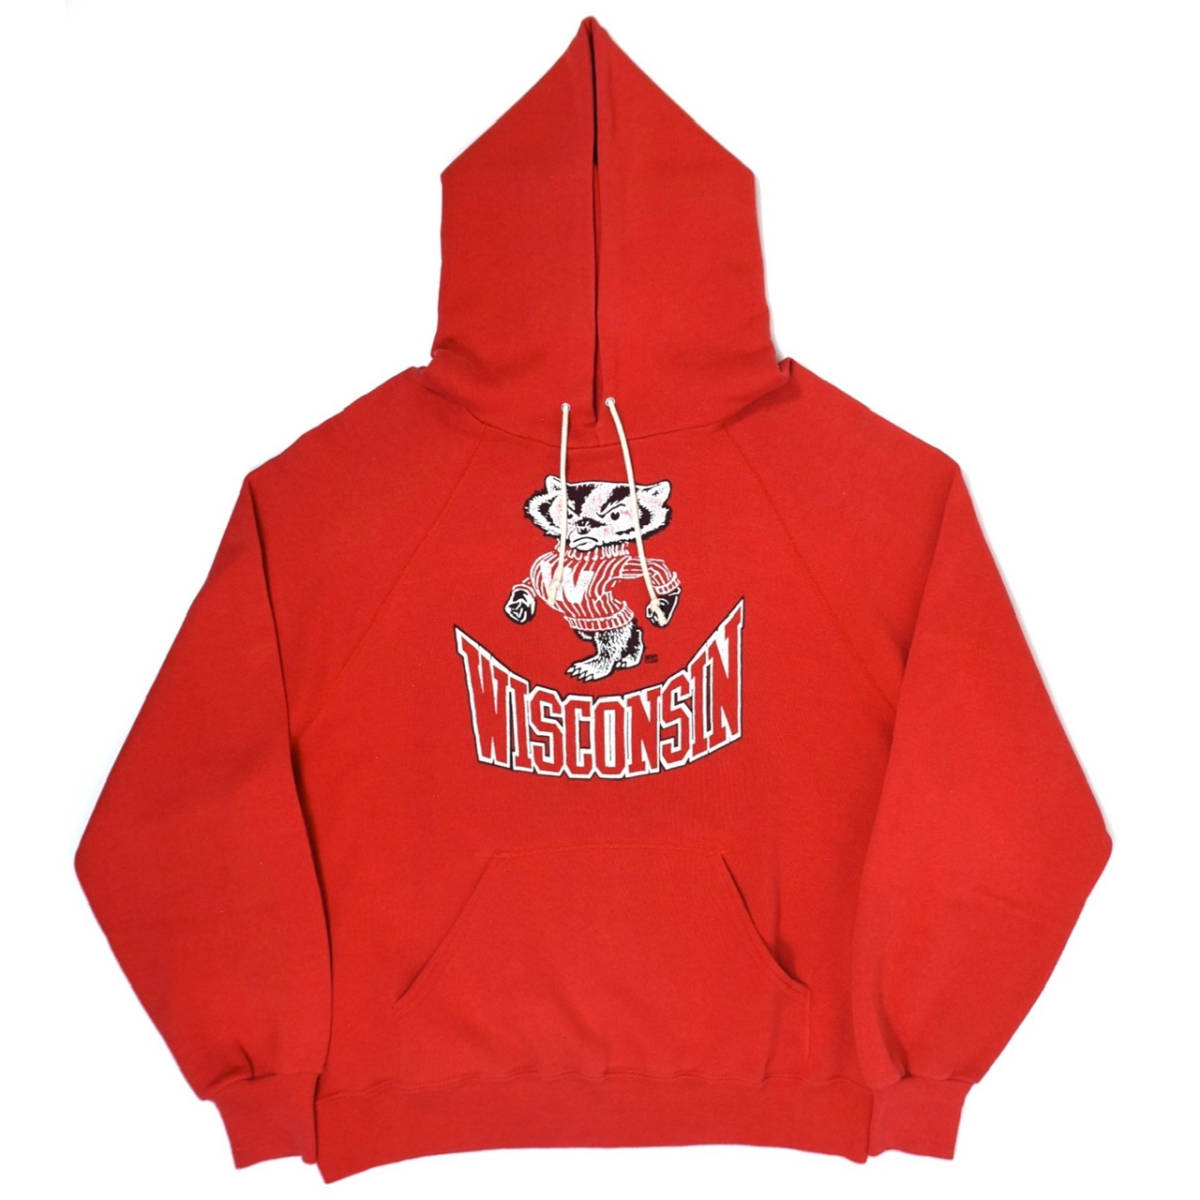 USA製 1980-90s WISCONSIN Sweat hoodie XL Red ヴィンテージ バセットウォーカー スウェットフーディー パーカ レッド 赤